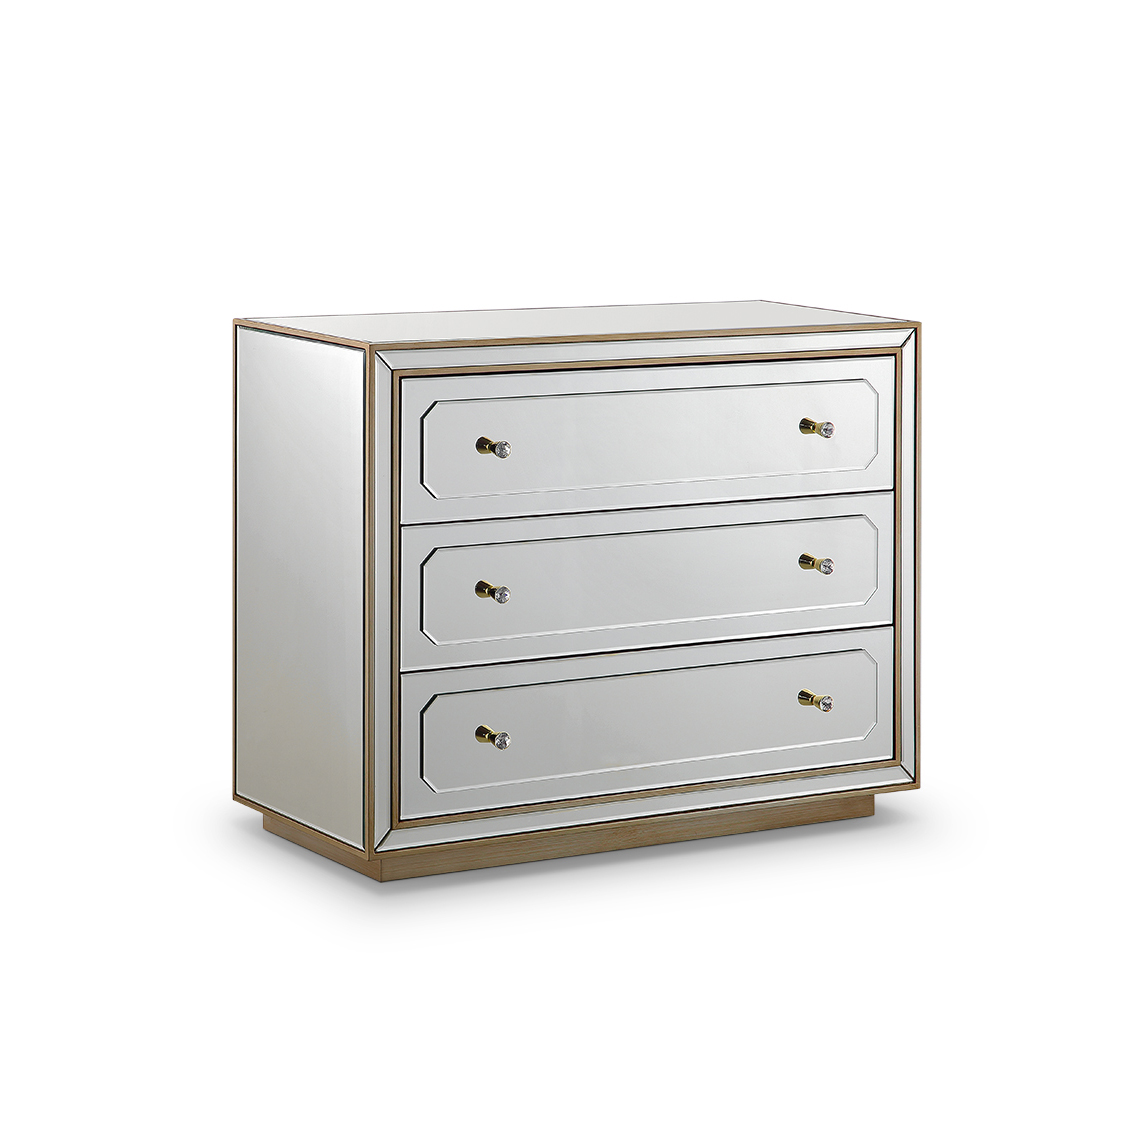 Dressers & Chests – 19C1003